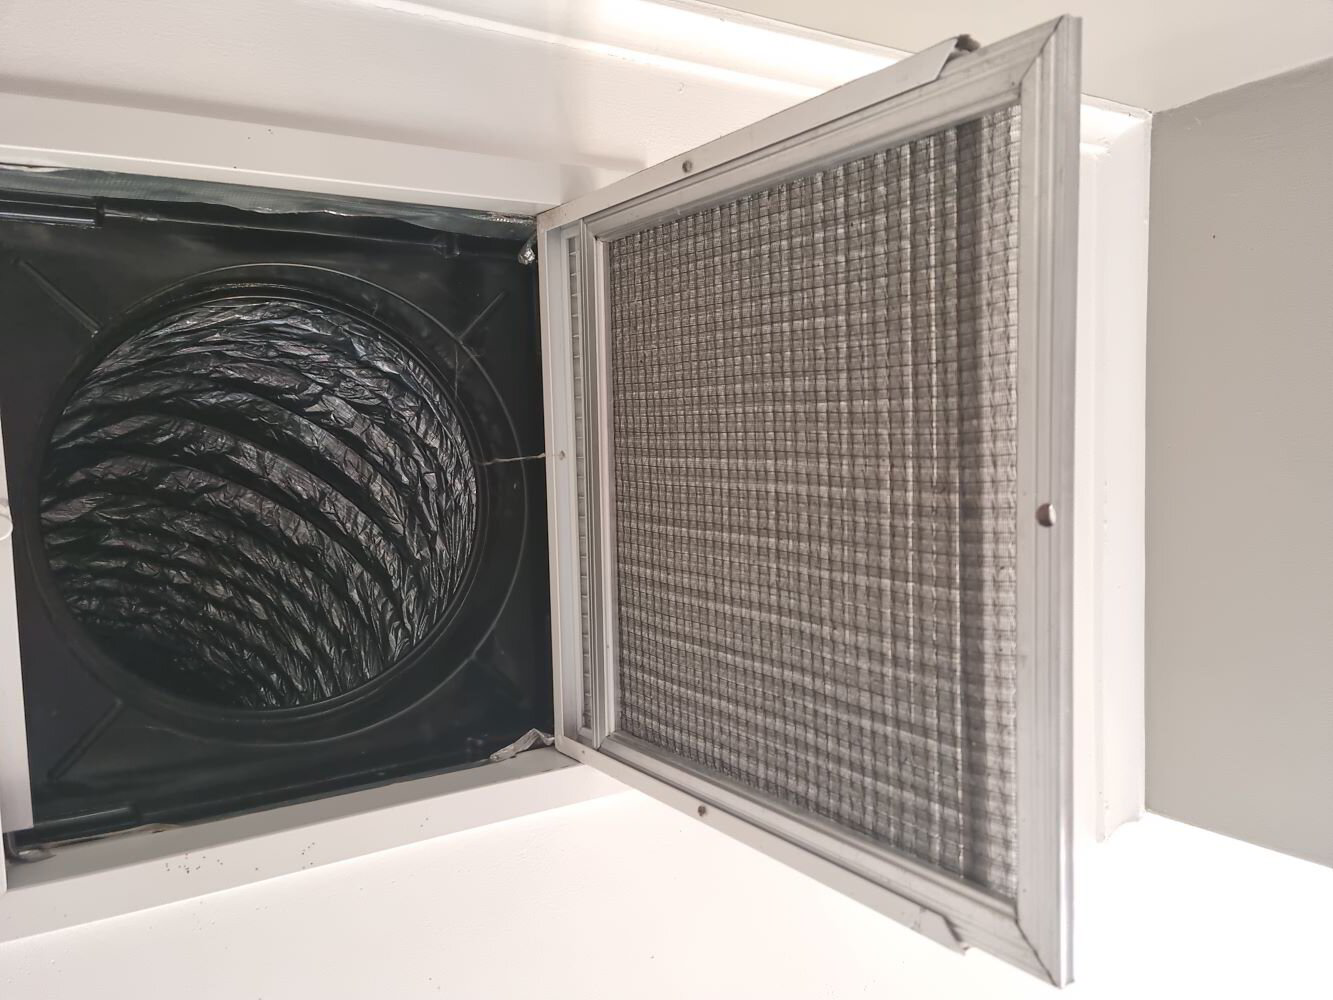 Heat Pump Cleaning Filters